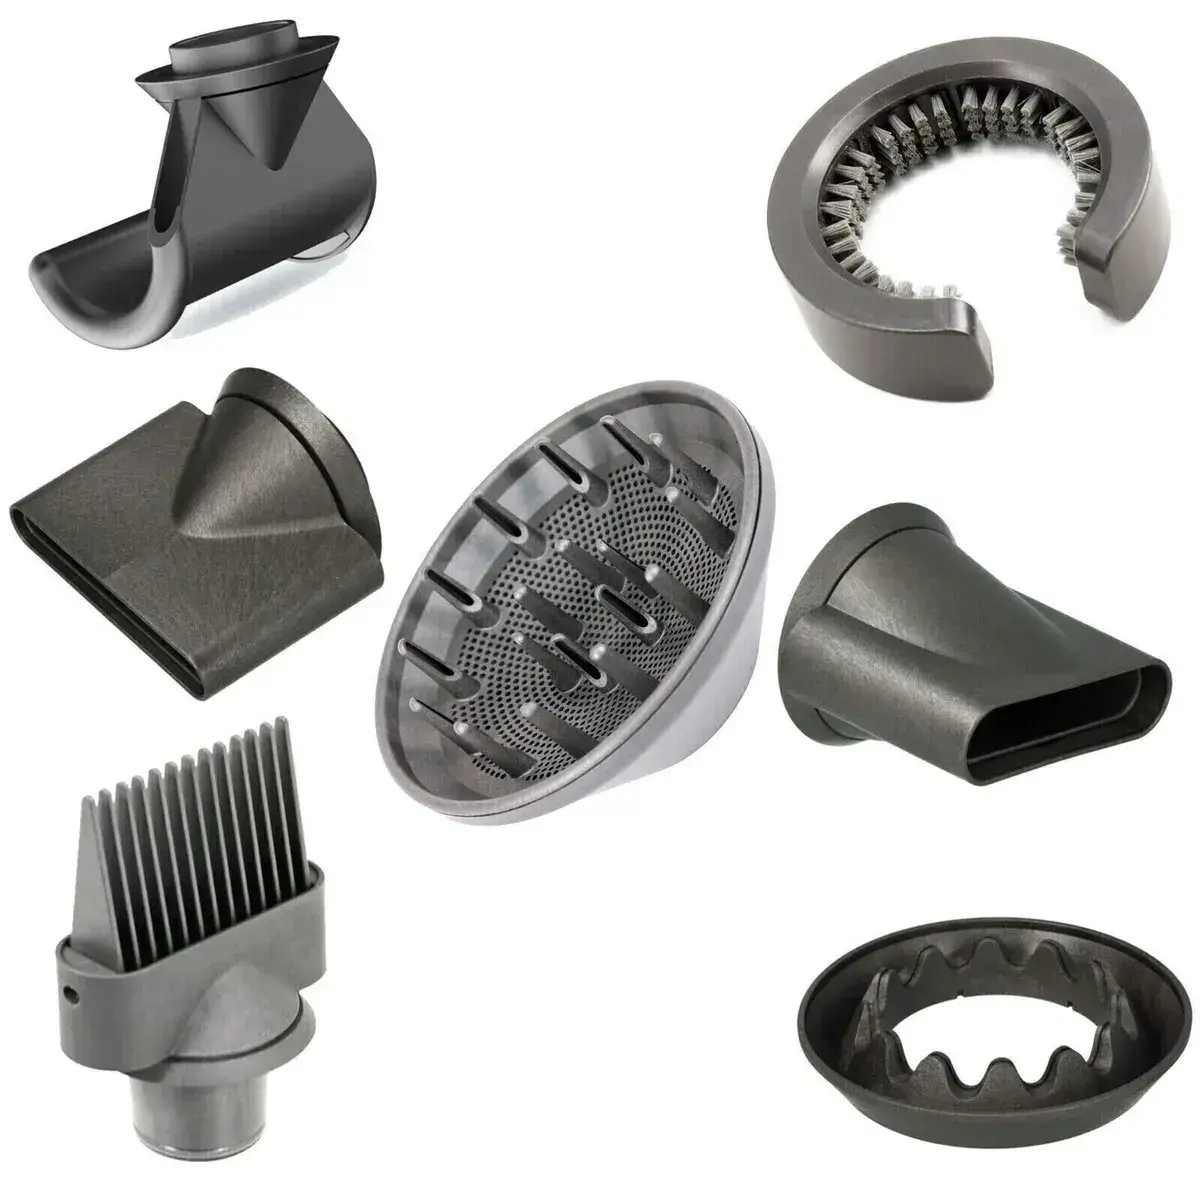 Various hair dryer nozzles and attachments for styling.